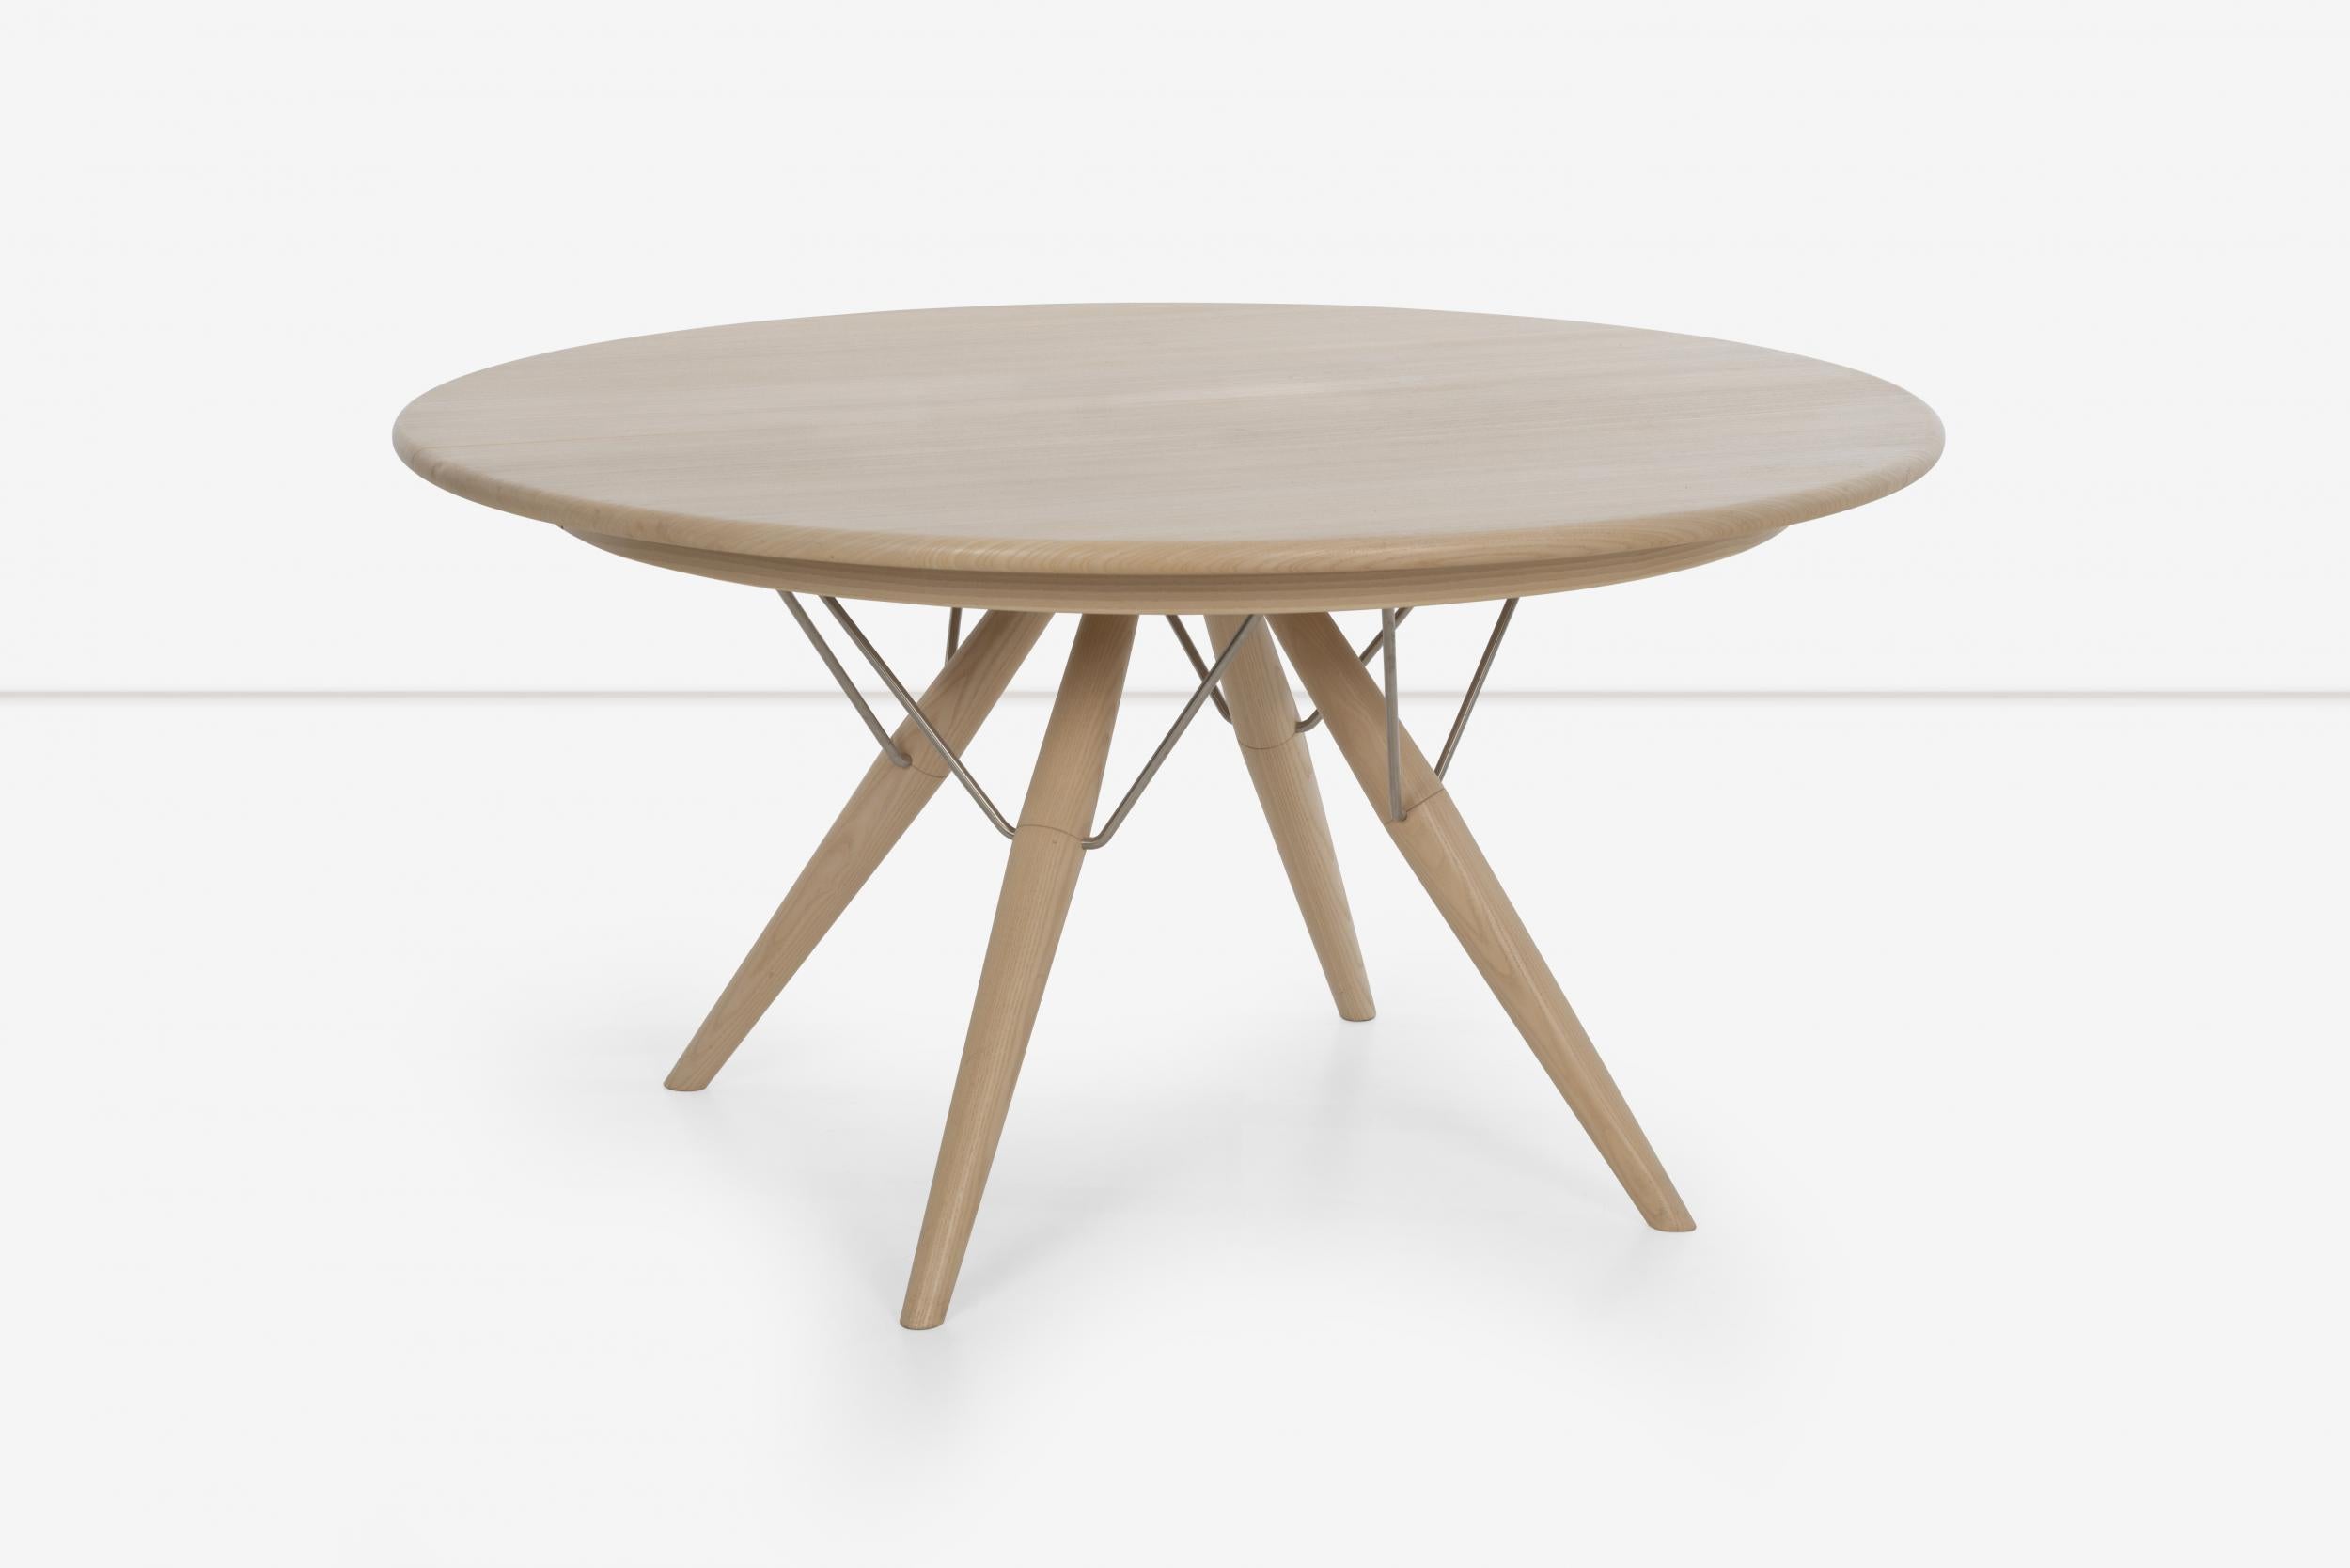 Hans Wegner Atlantide dining table: A construction masterwork, with plenty of knee and leg room for dinners by joining the legs in the center of the top forming a triangular formation with metal supports . Diameter 55.25